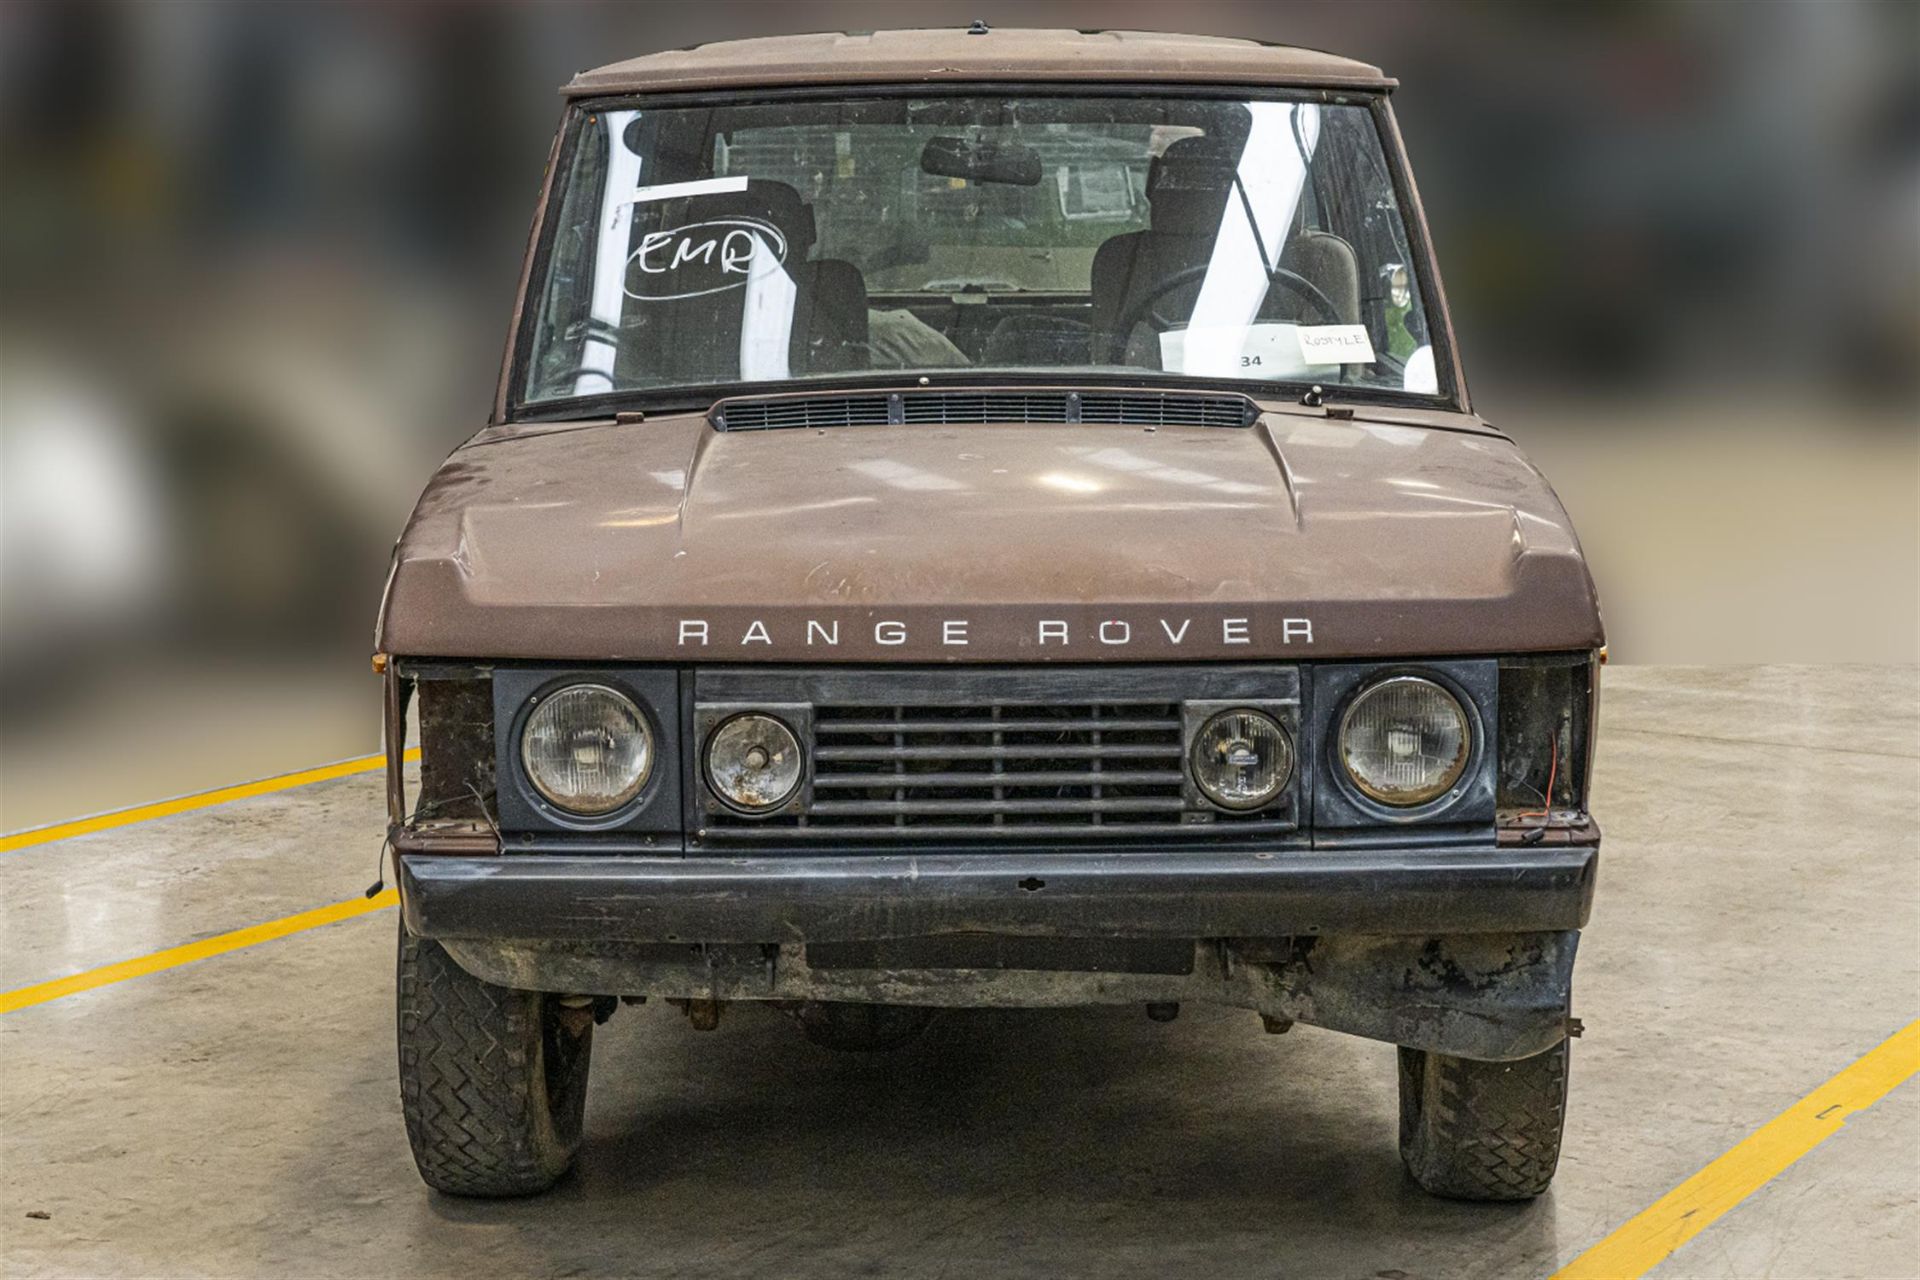 1972 Range Rover Classic (believed 'Suffix A') - Image 2 of 5